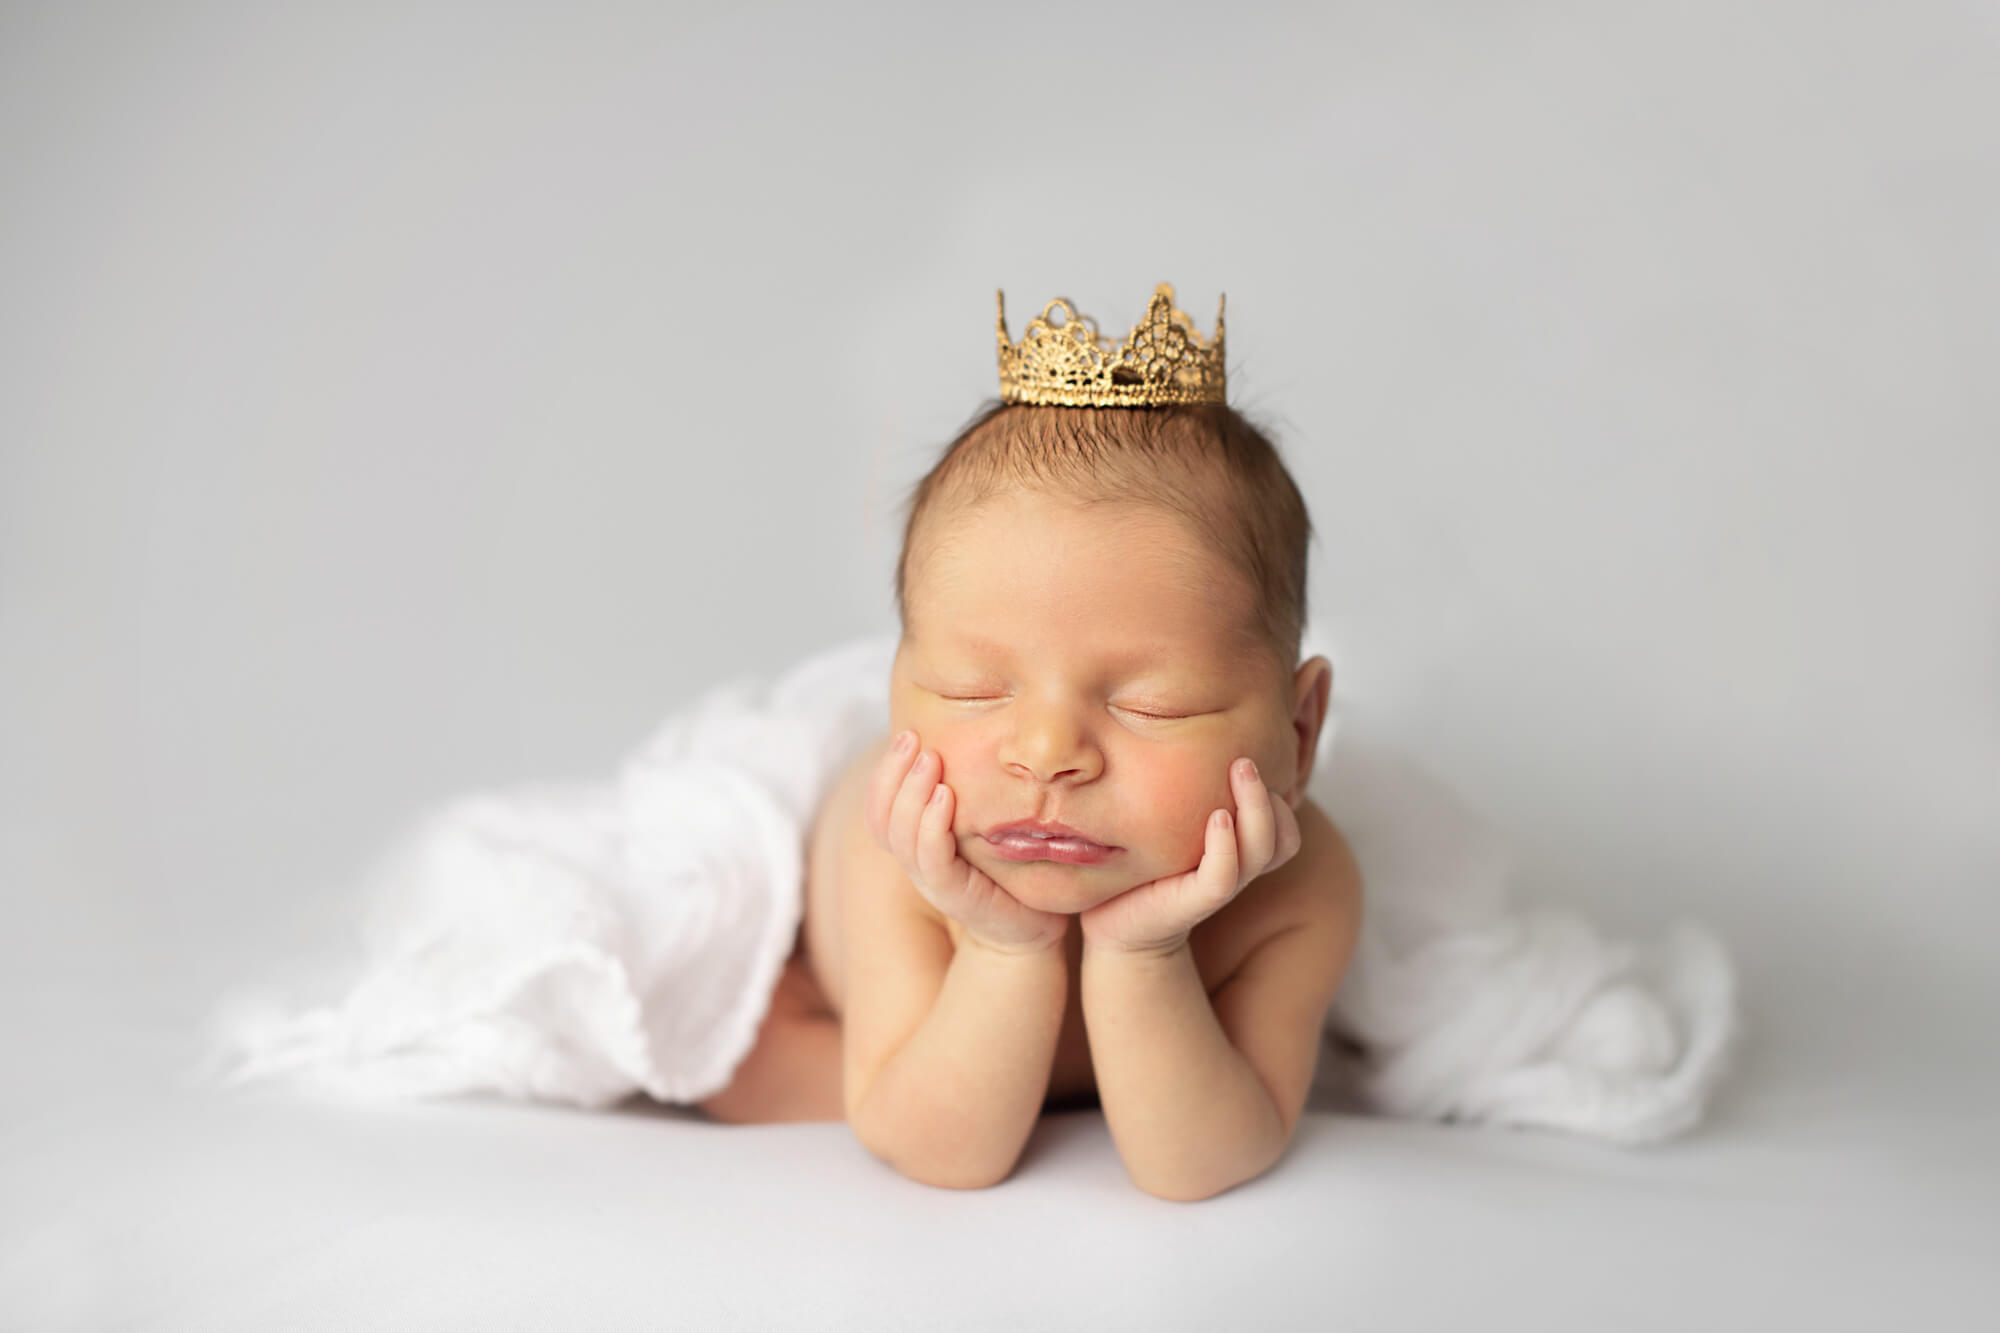 newborn baby wearing a crown and leaning on their hands